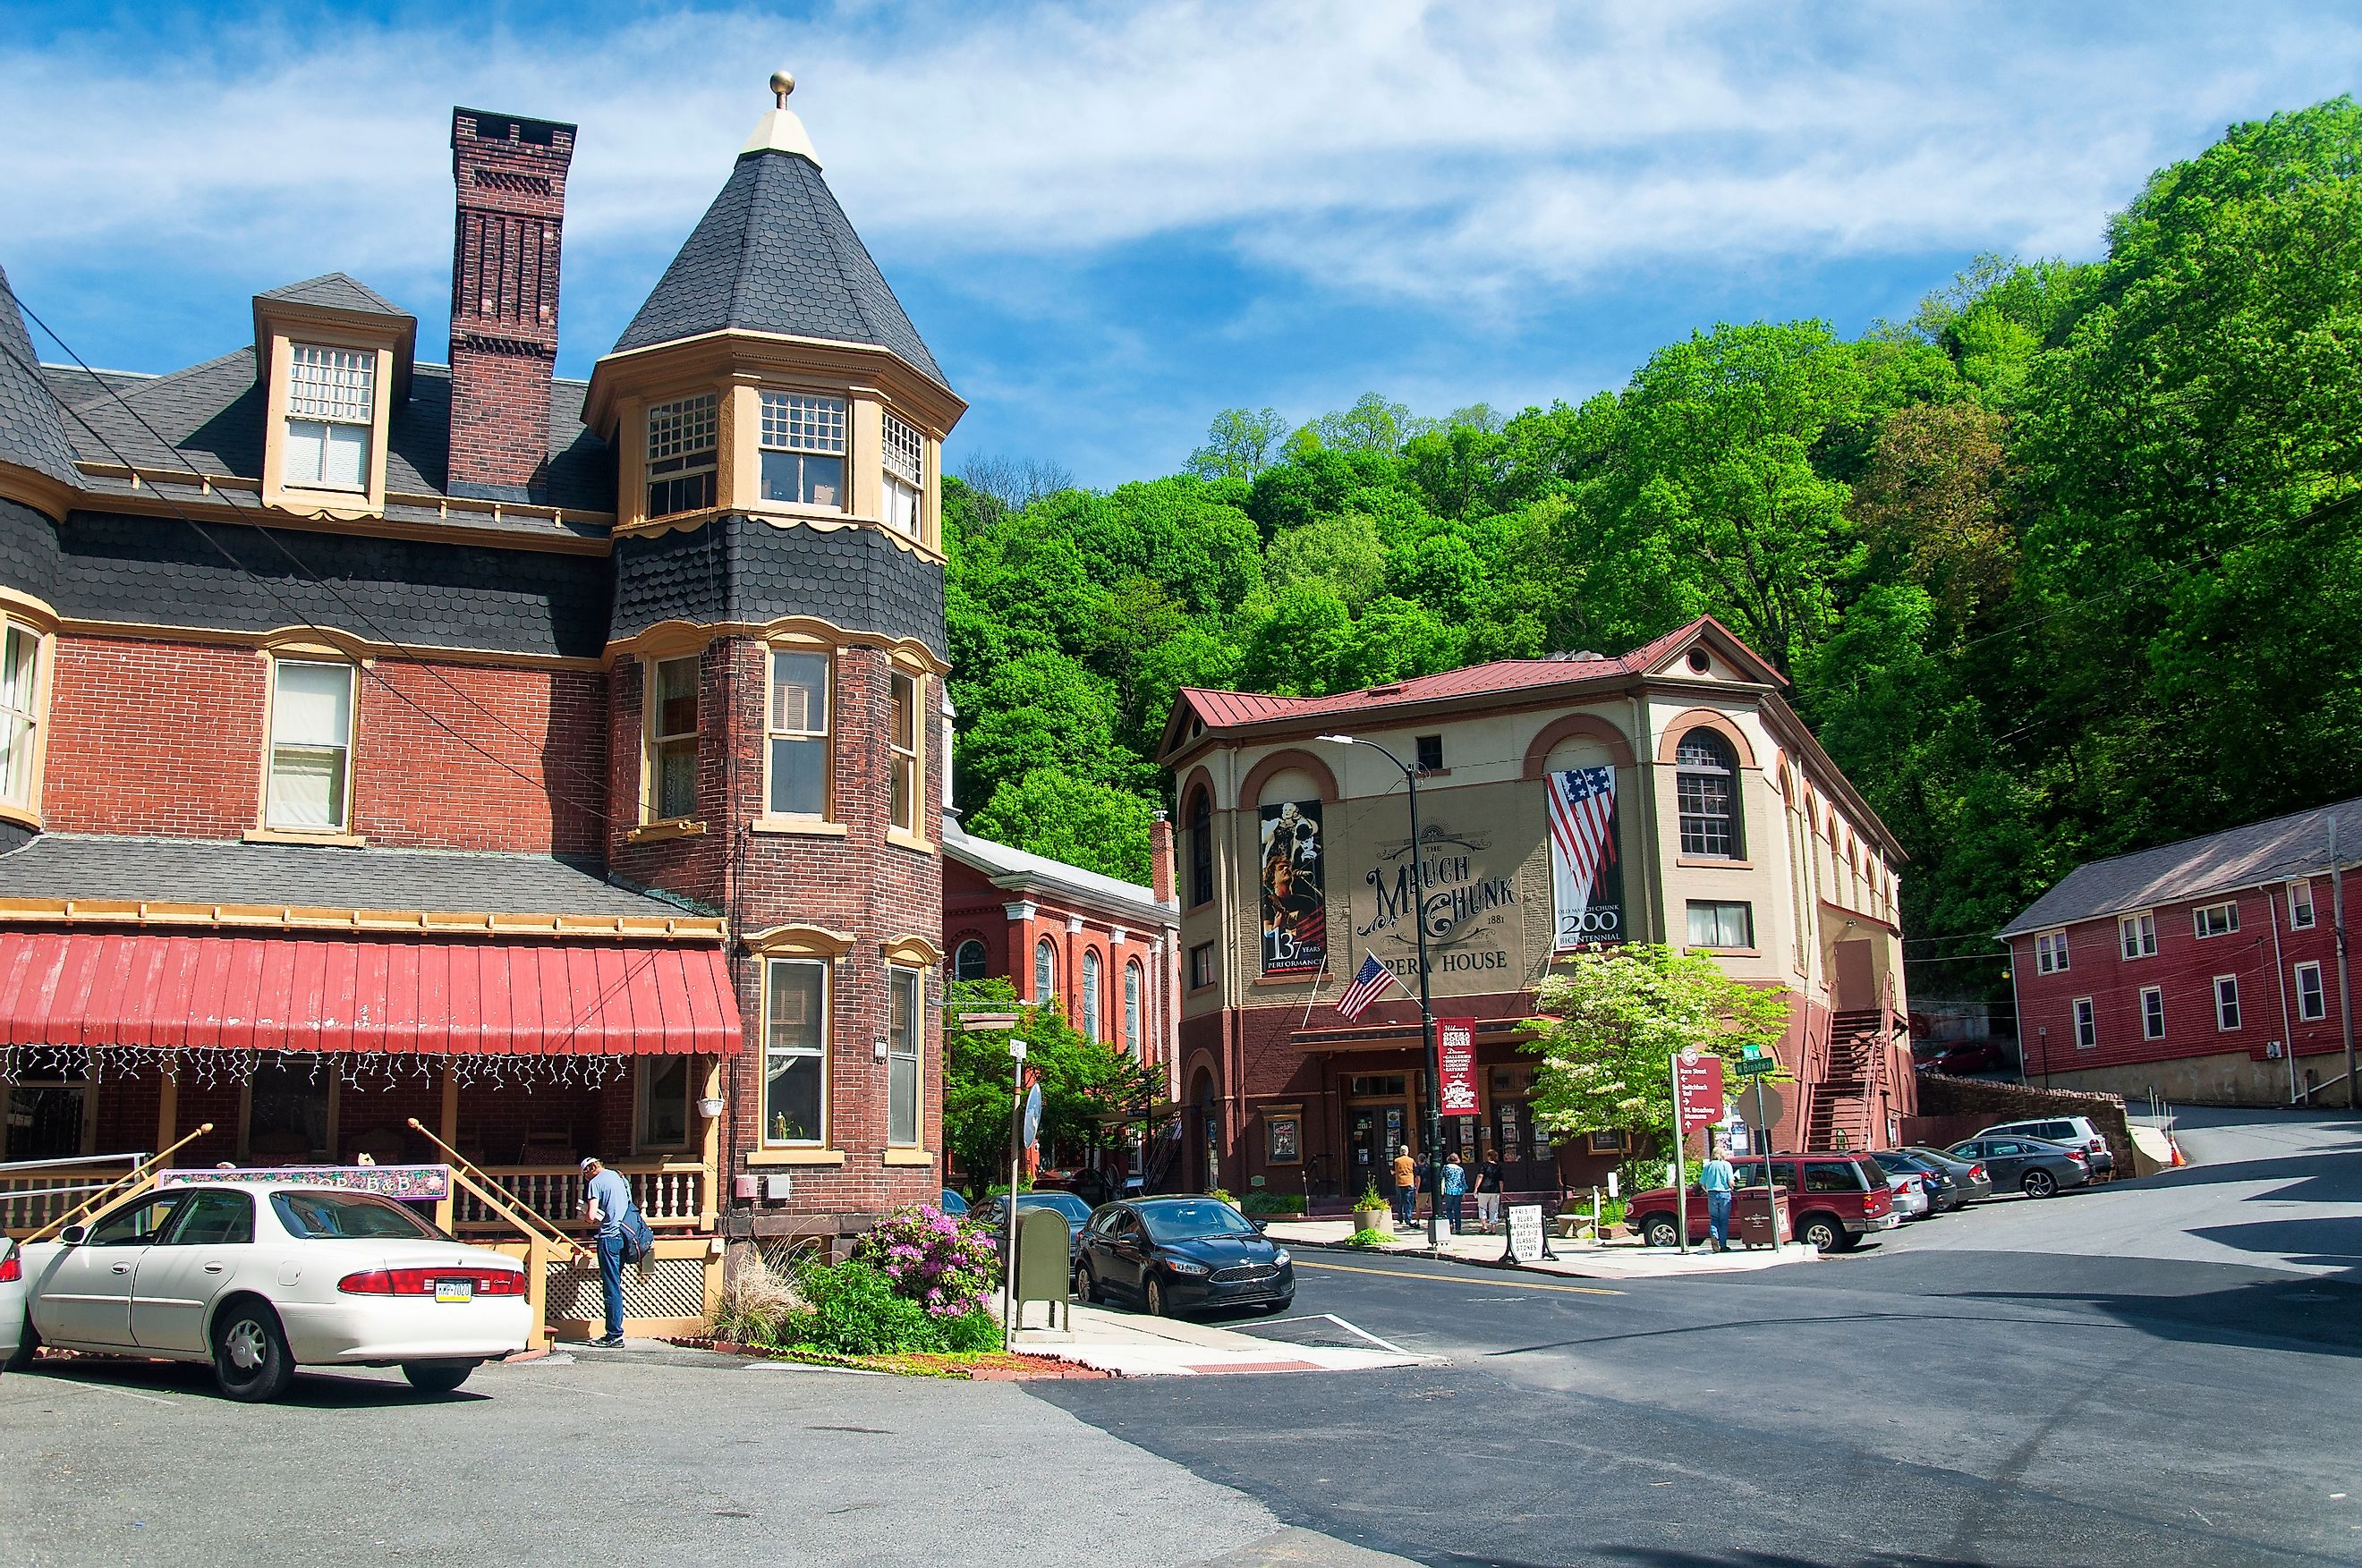 Jim Thorpe, Pennsylvania. the Mauch Chunk Opera house located within the historic town of Jim Thorpe Pennsylvania on a sunny day.